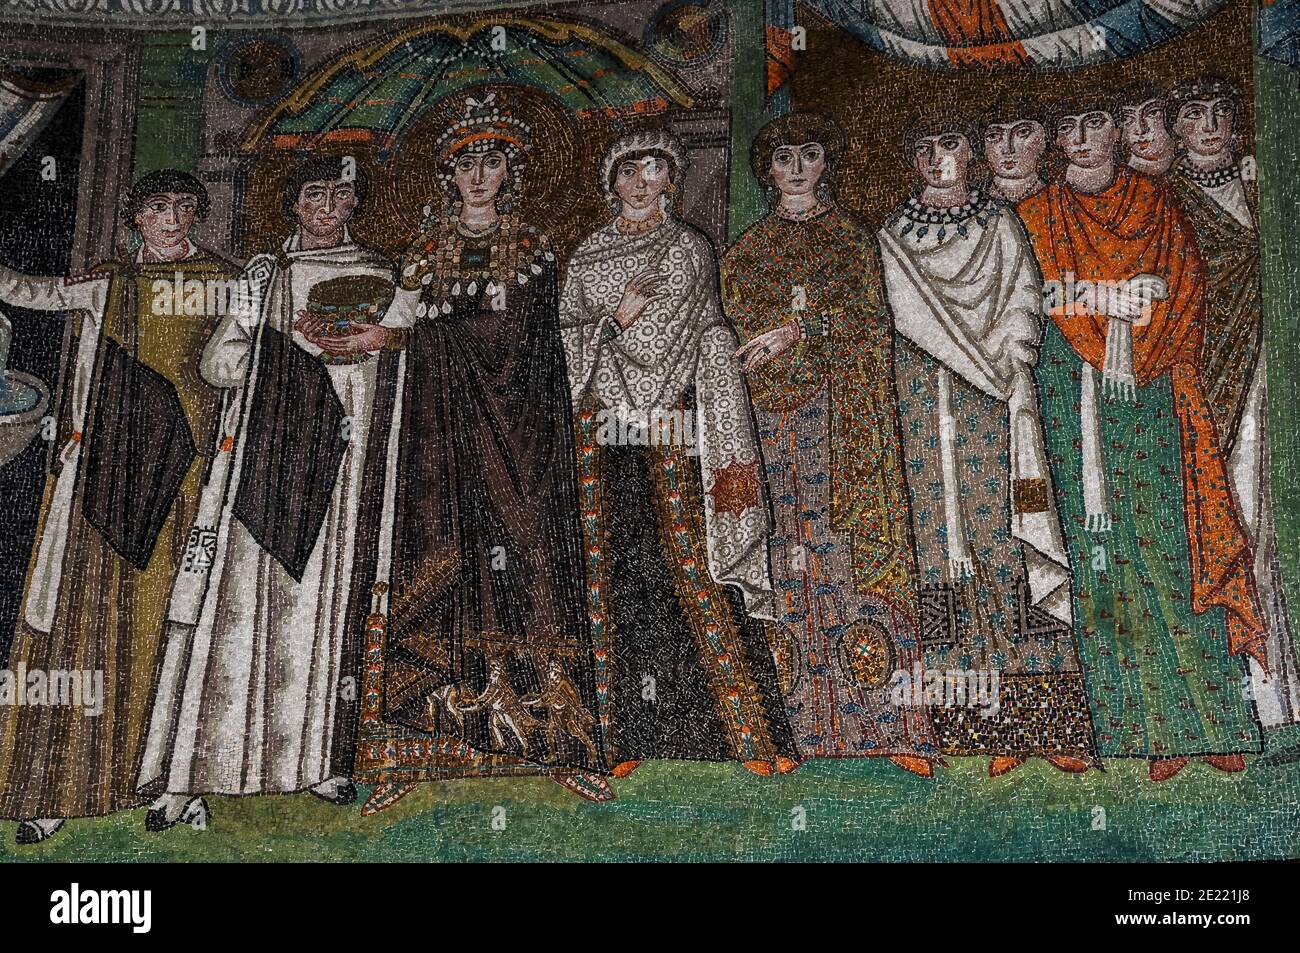 Theodora, Empress of the Byzantine or Eastern Roman Empire, holds a  communion chalice as she stands with her retinue. Byzantine mosaic in the  Basilica di San Vitale at Ravenna, Emilia-Romagna, Italy. The